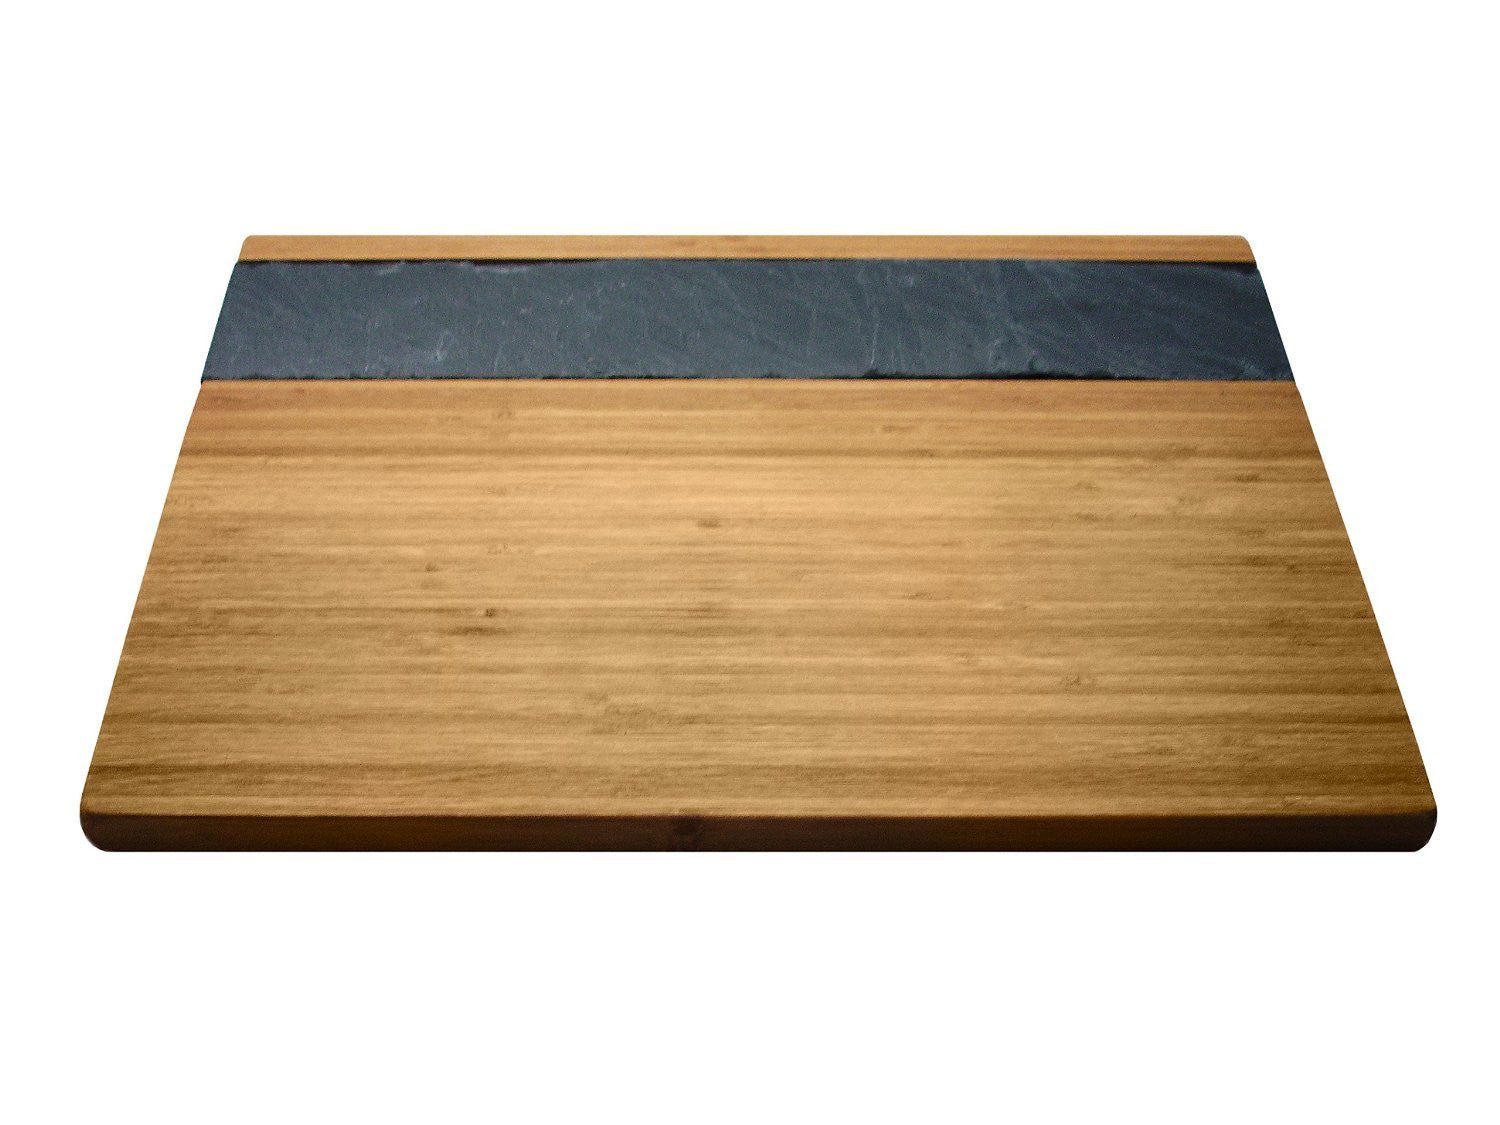 Epicureanist Ep-bblstry Bamboo & Slate Cheese Serving Tray